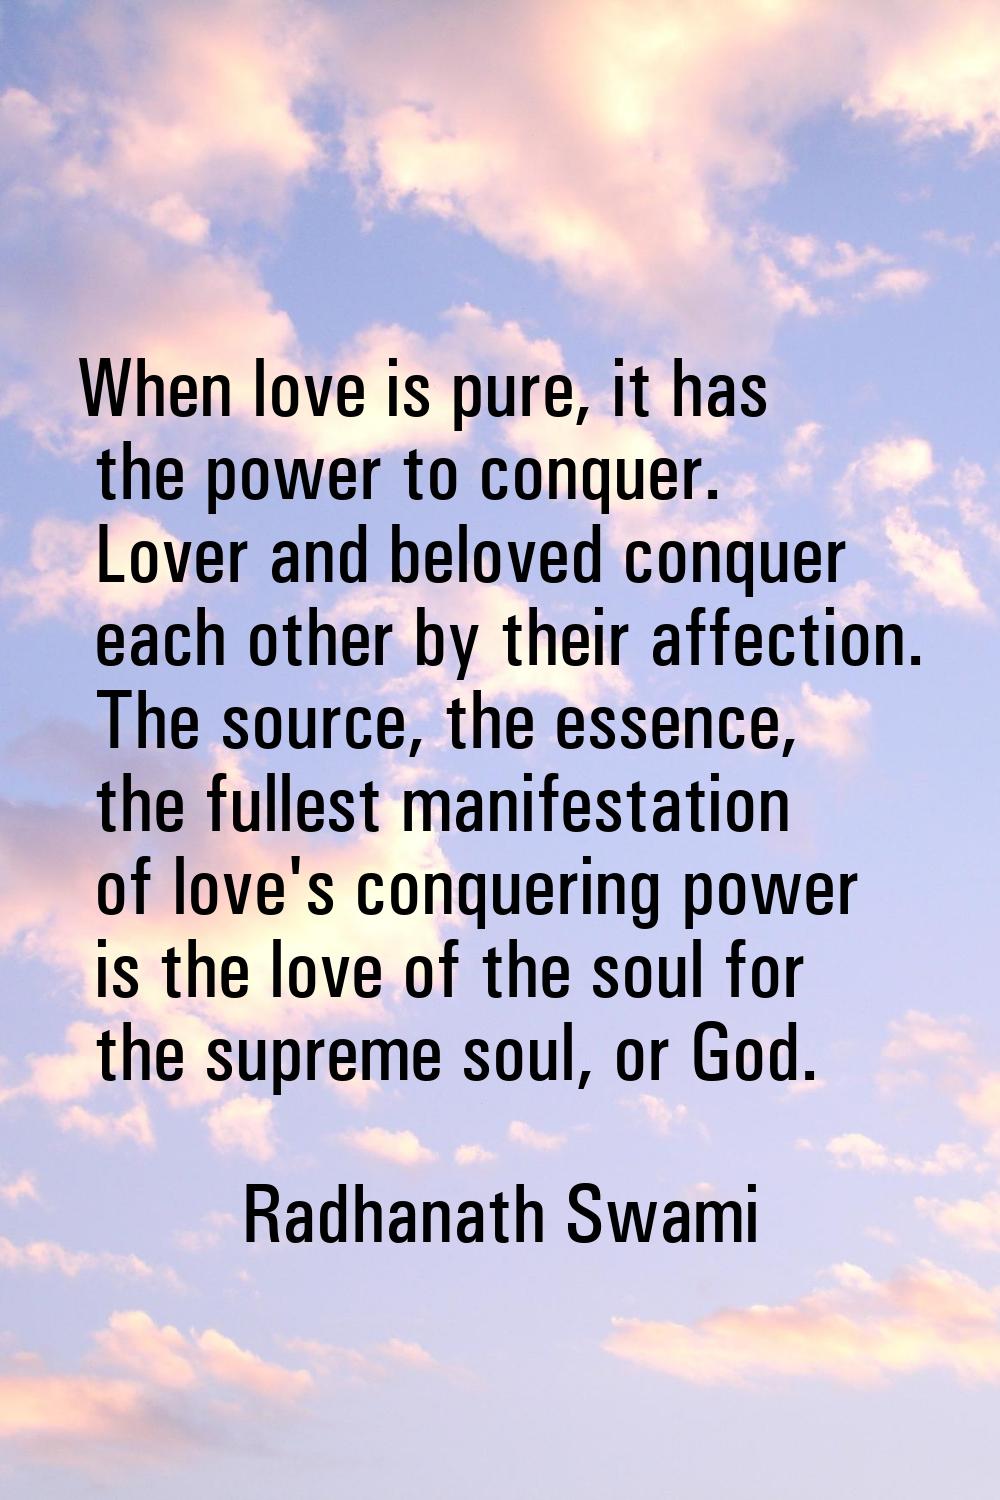 When love is pure, it has the power to conquer. Lover and beloved conquer each other by their affec